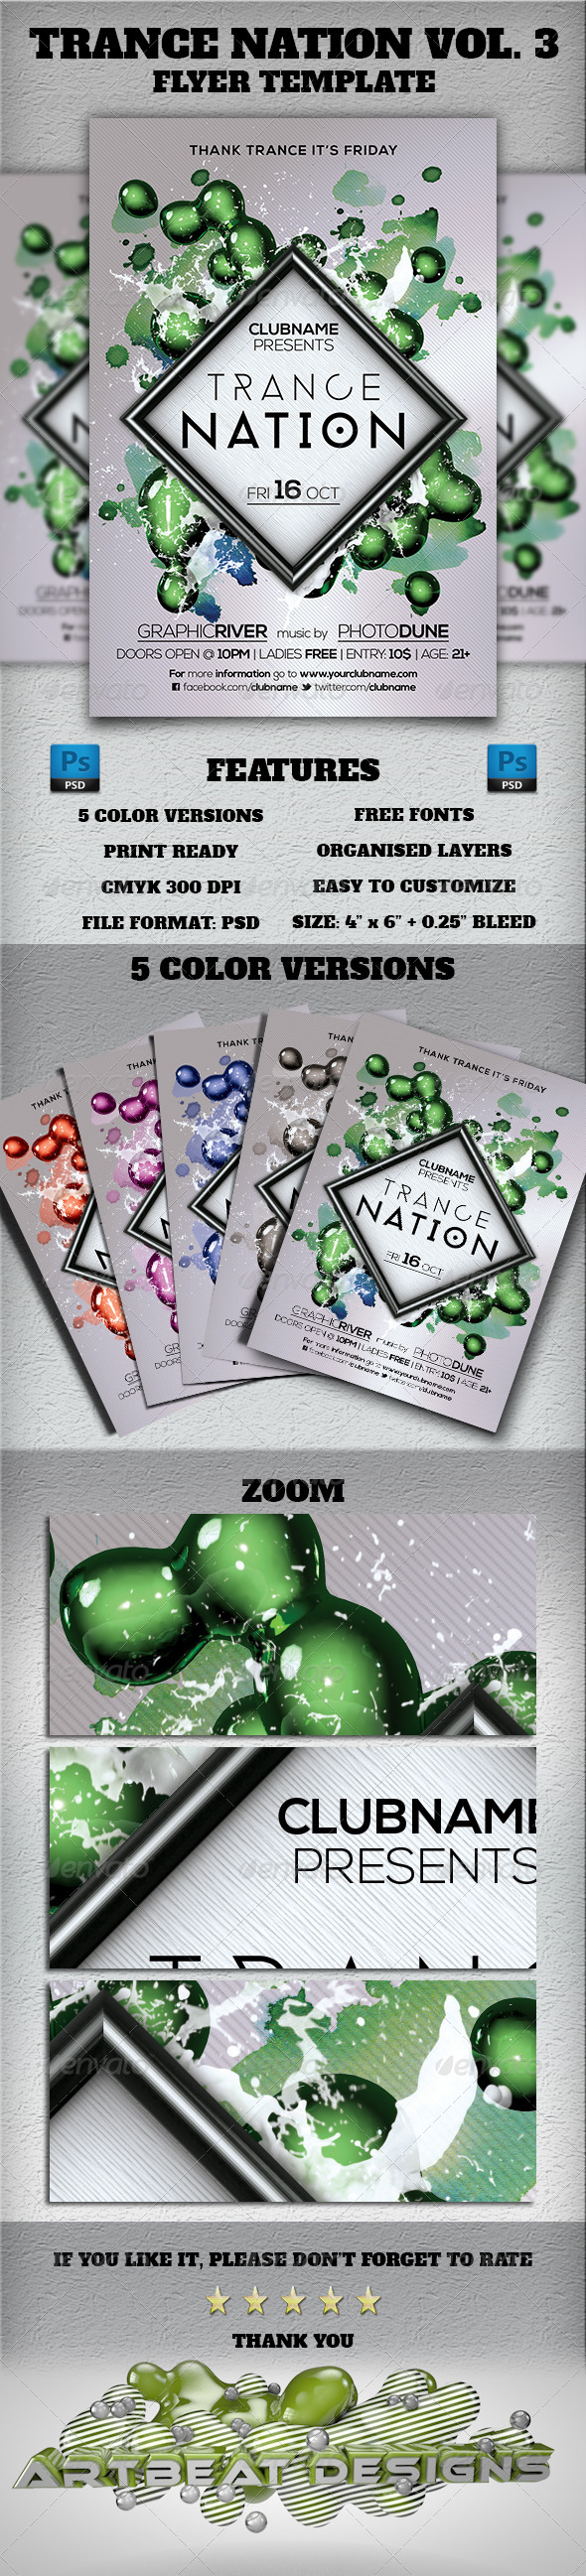 Trance Nation Vol 3 Flyer Template